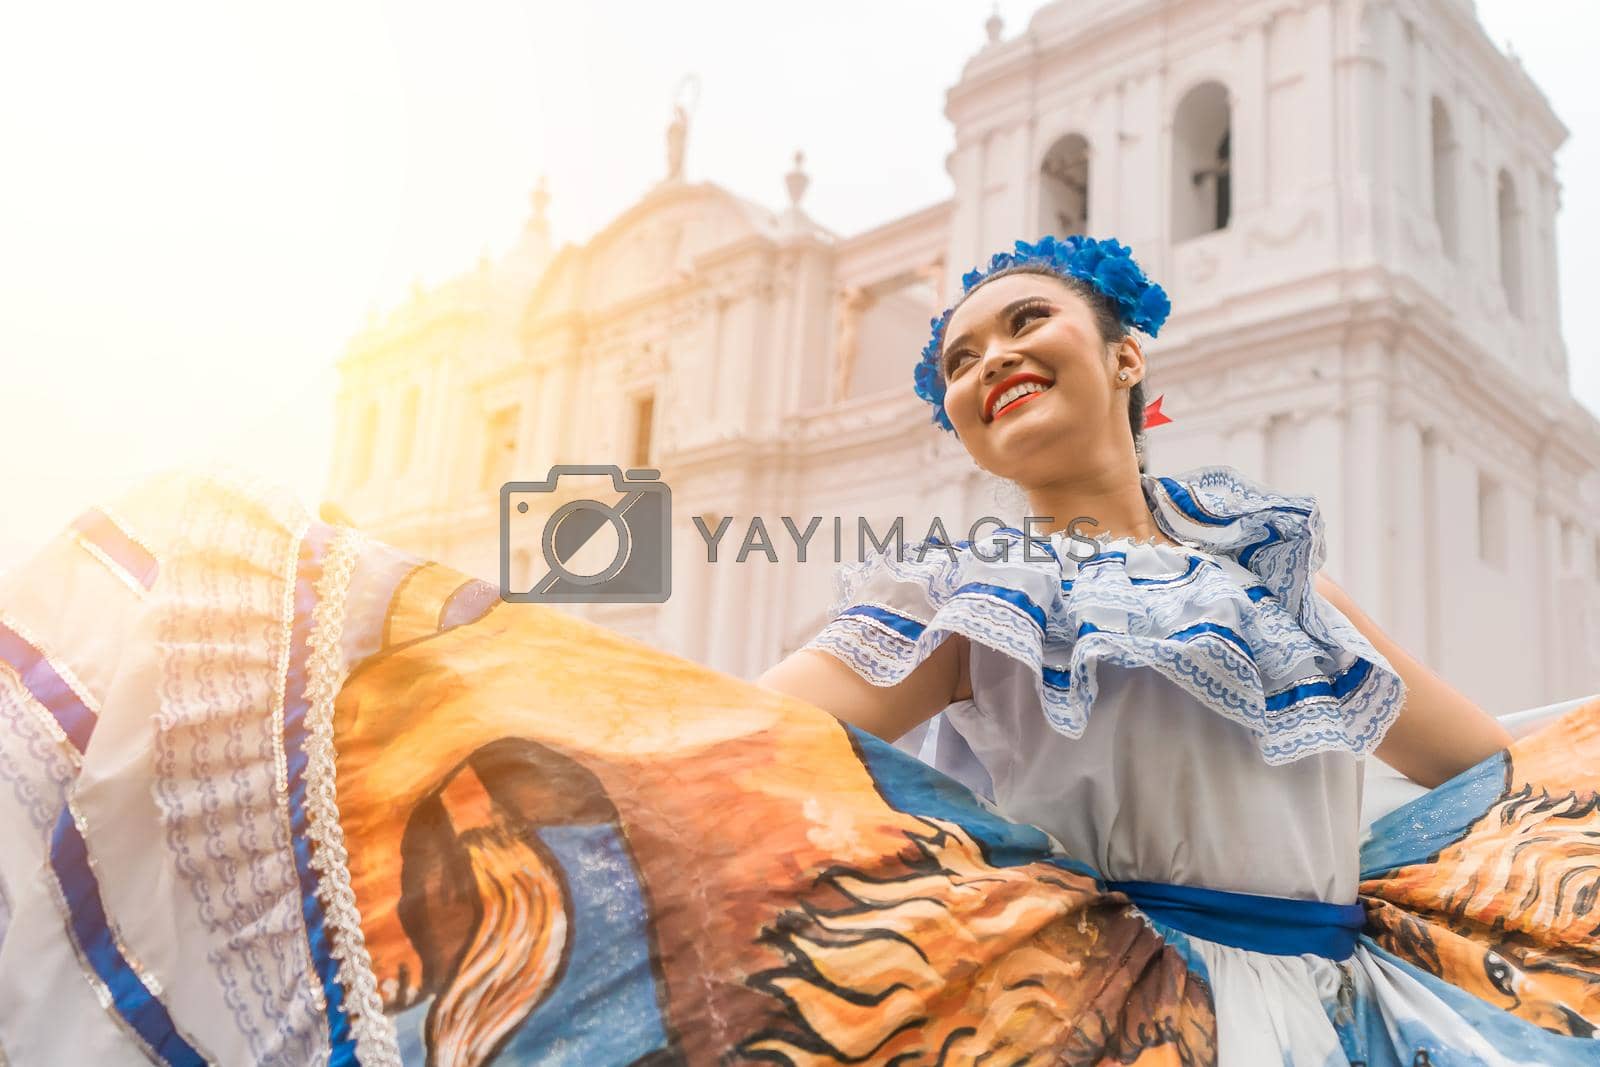 Royalty free image of Traditional dancer with a typical Nicaraguan costume dancing outside the cathedral of Leon Nicaragua celebrating the independence by cfalvarez